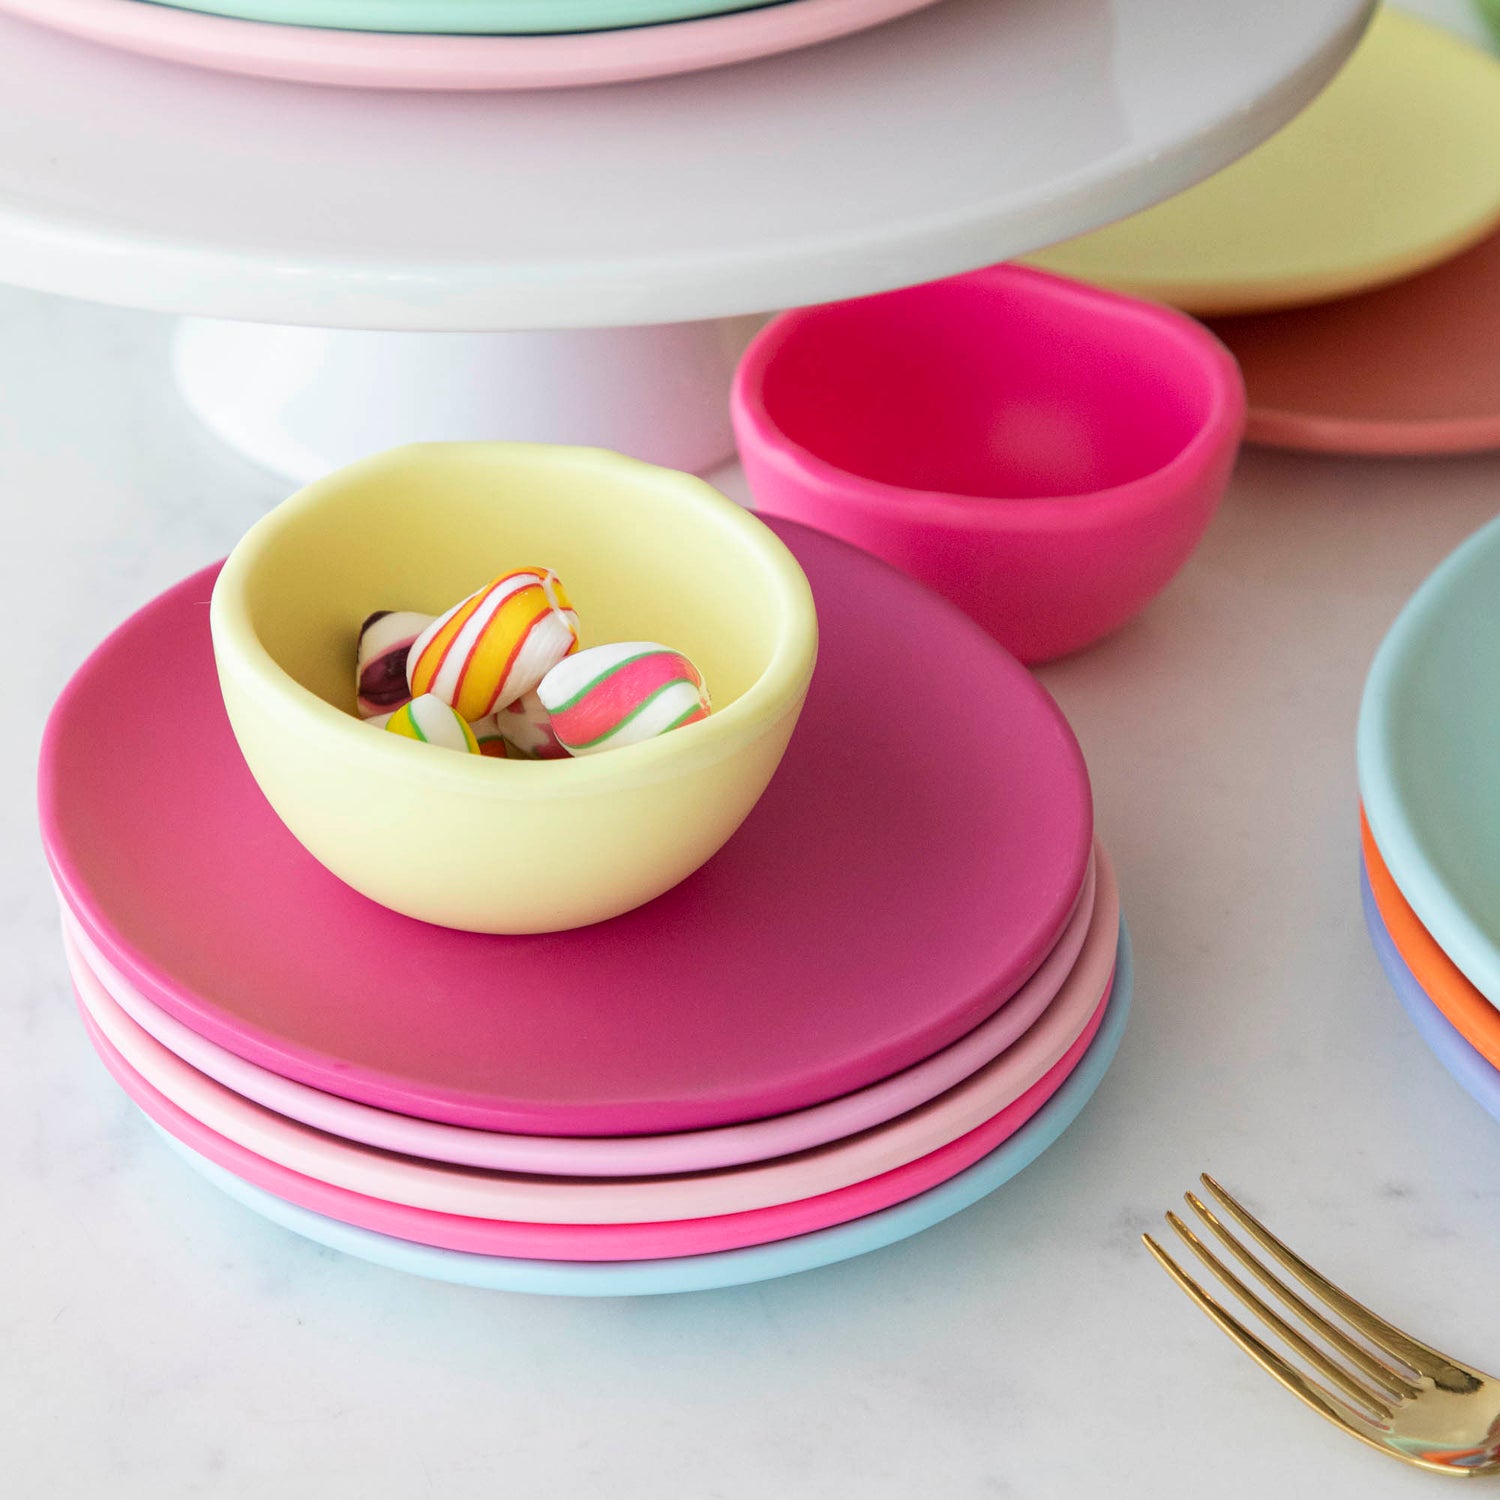 A stack of colorful plates and a bowl on a white table